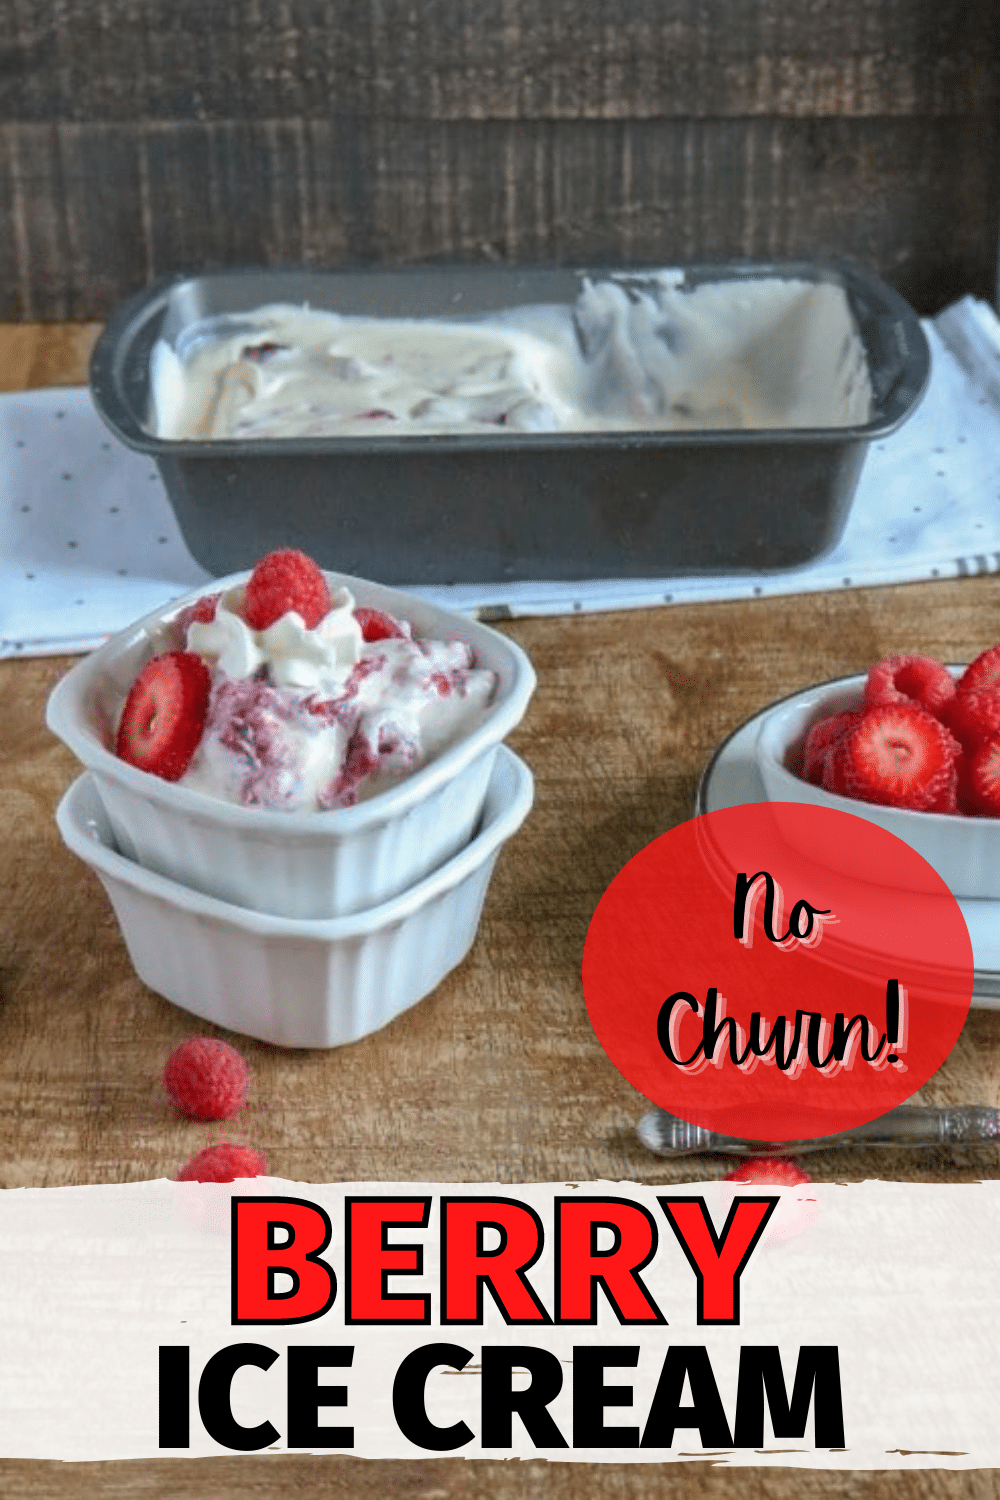 This homemade no-churn berry ice cream is SO easy to make -- you just need 4 ingredients! It's the perfect summer treat! #easydesserts #icecream via @wondermomwannab